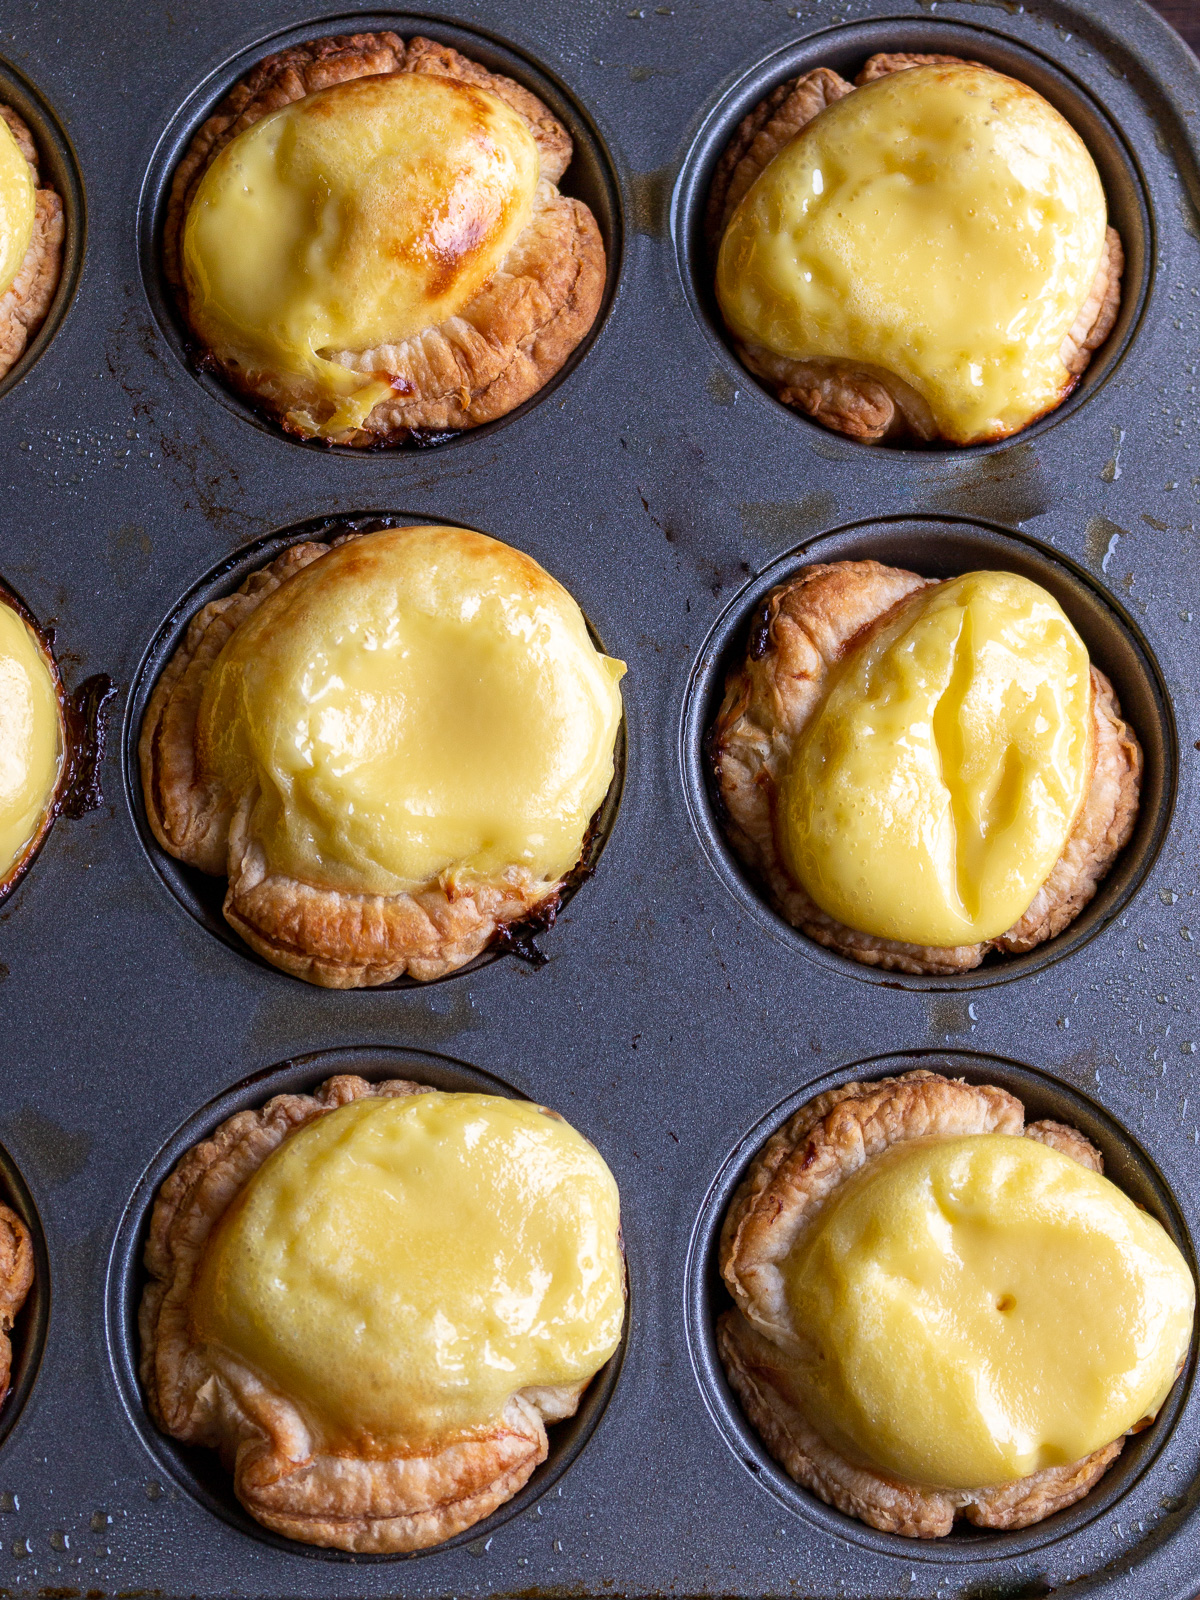 Egg tarts that puffed after baking.